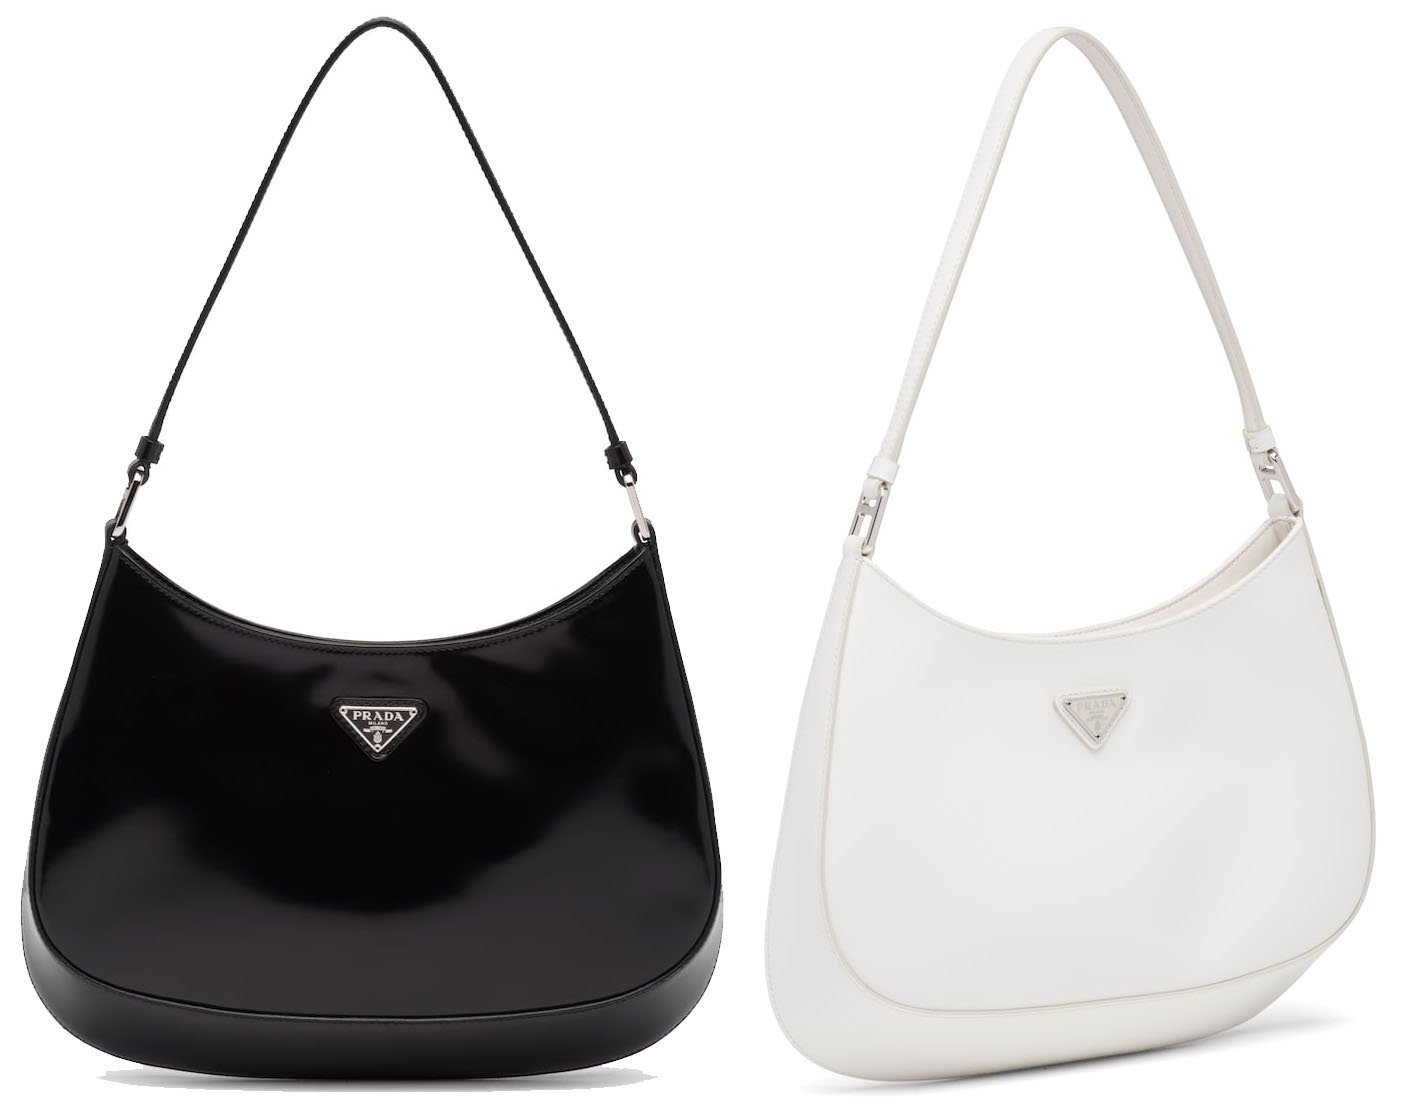 The Prada Cleo: An exquisite mix of modern flair and vintage hobo style, from the Spring 2021 collection